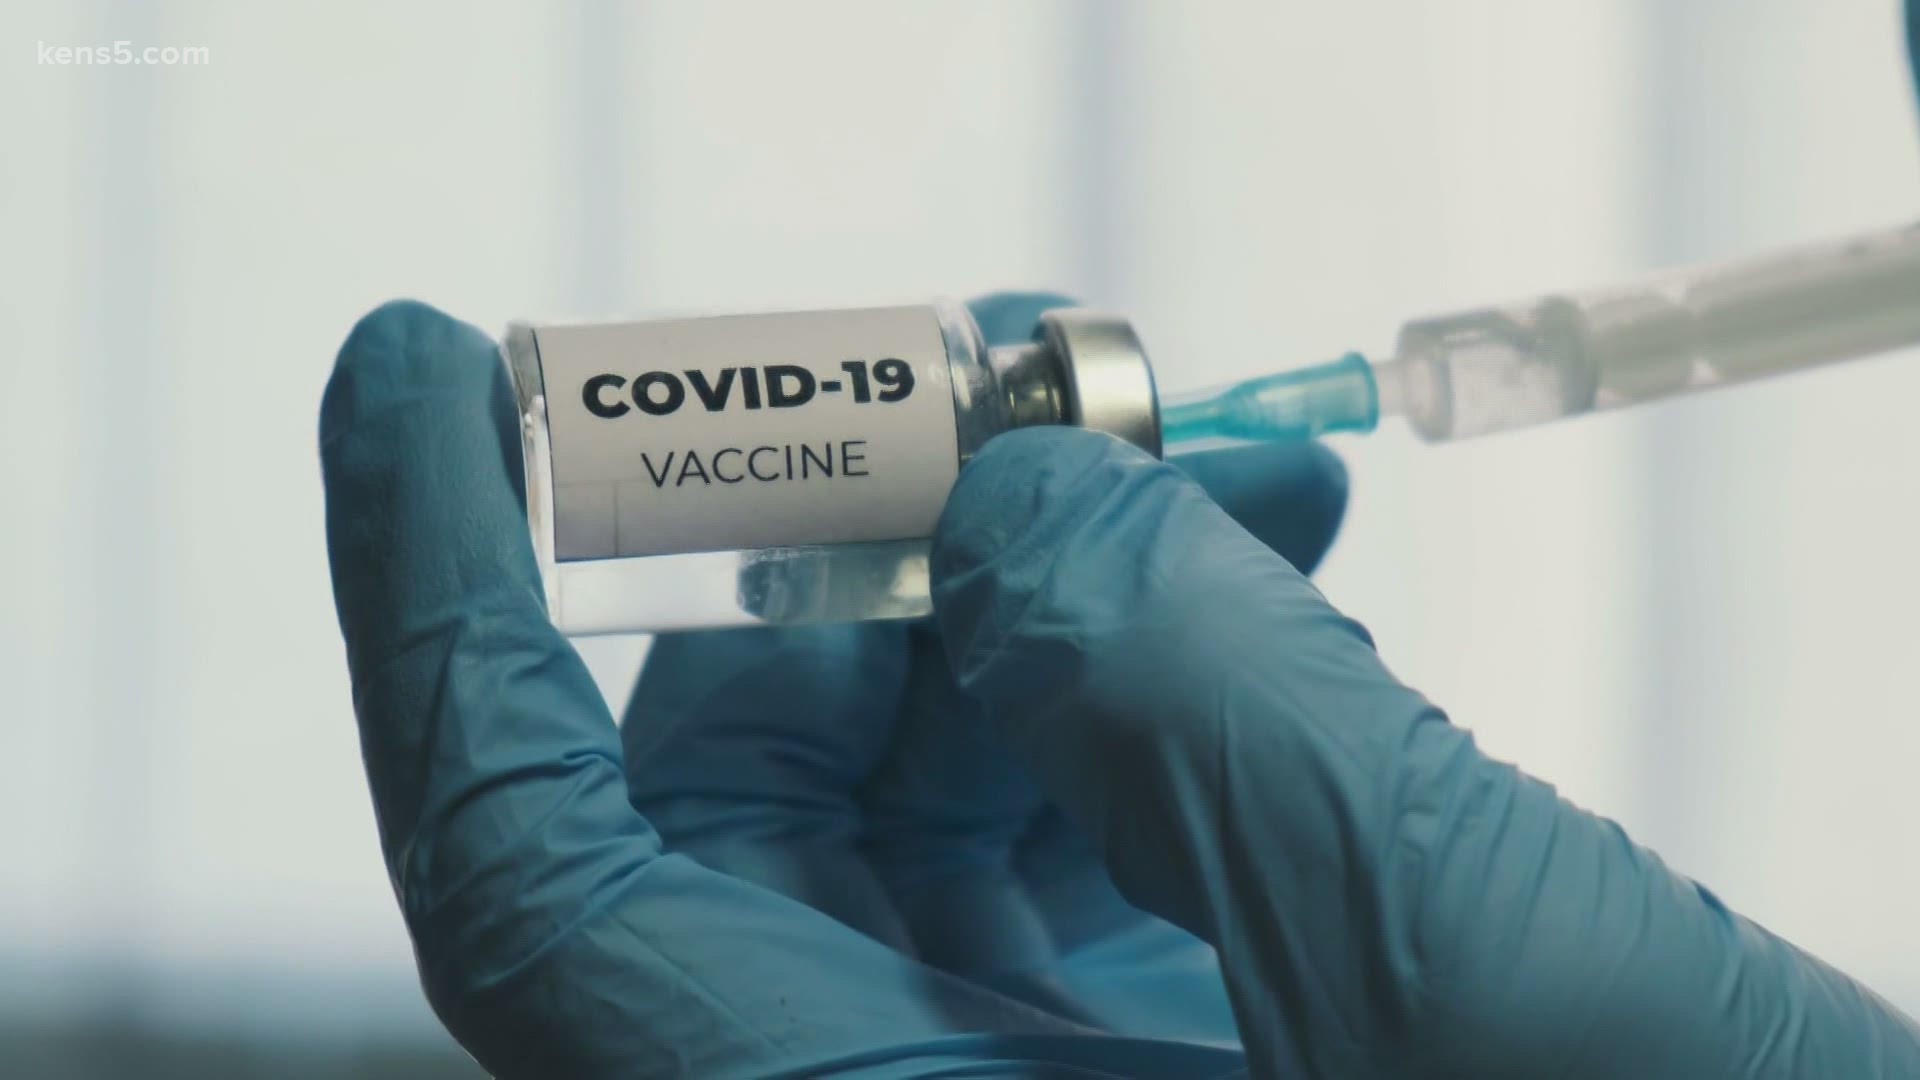 A phased distribution plan is set for a coronavirus vaccine once it's approved by the FDA.